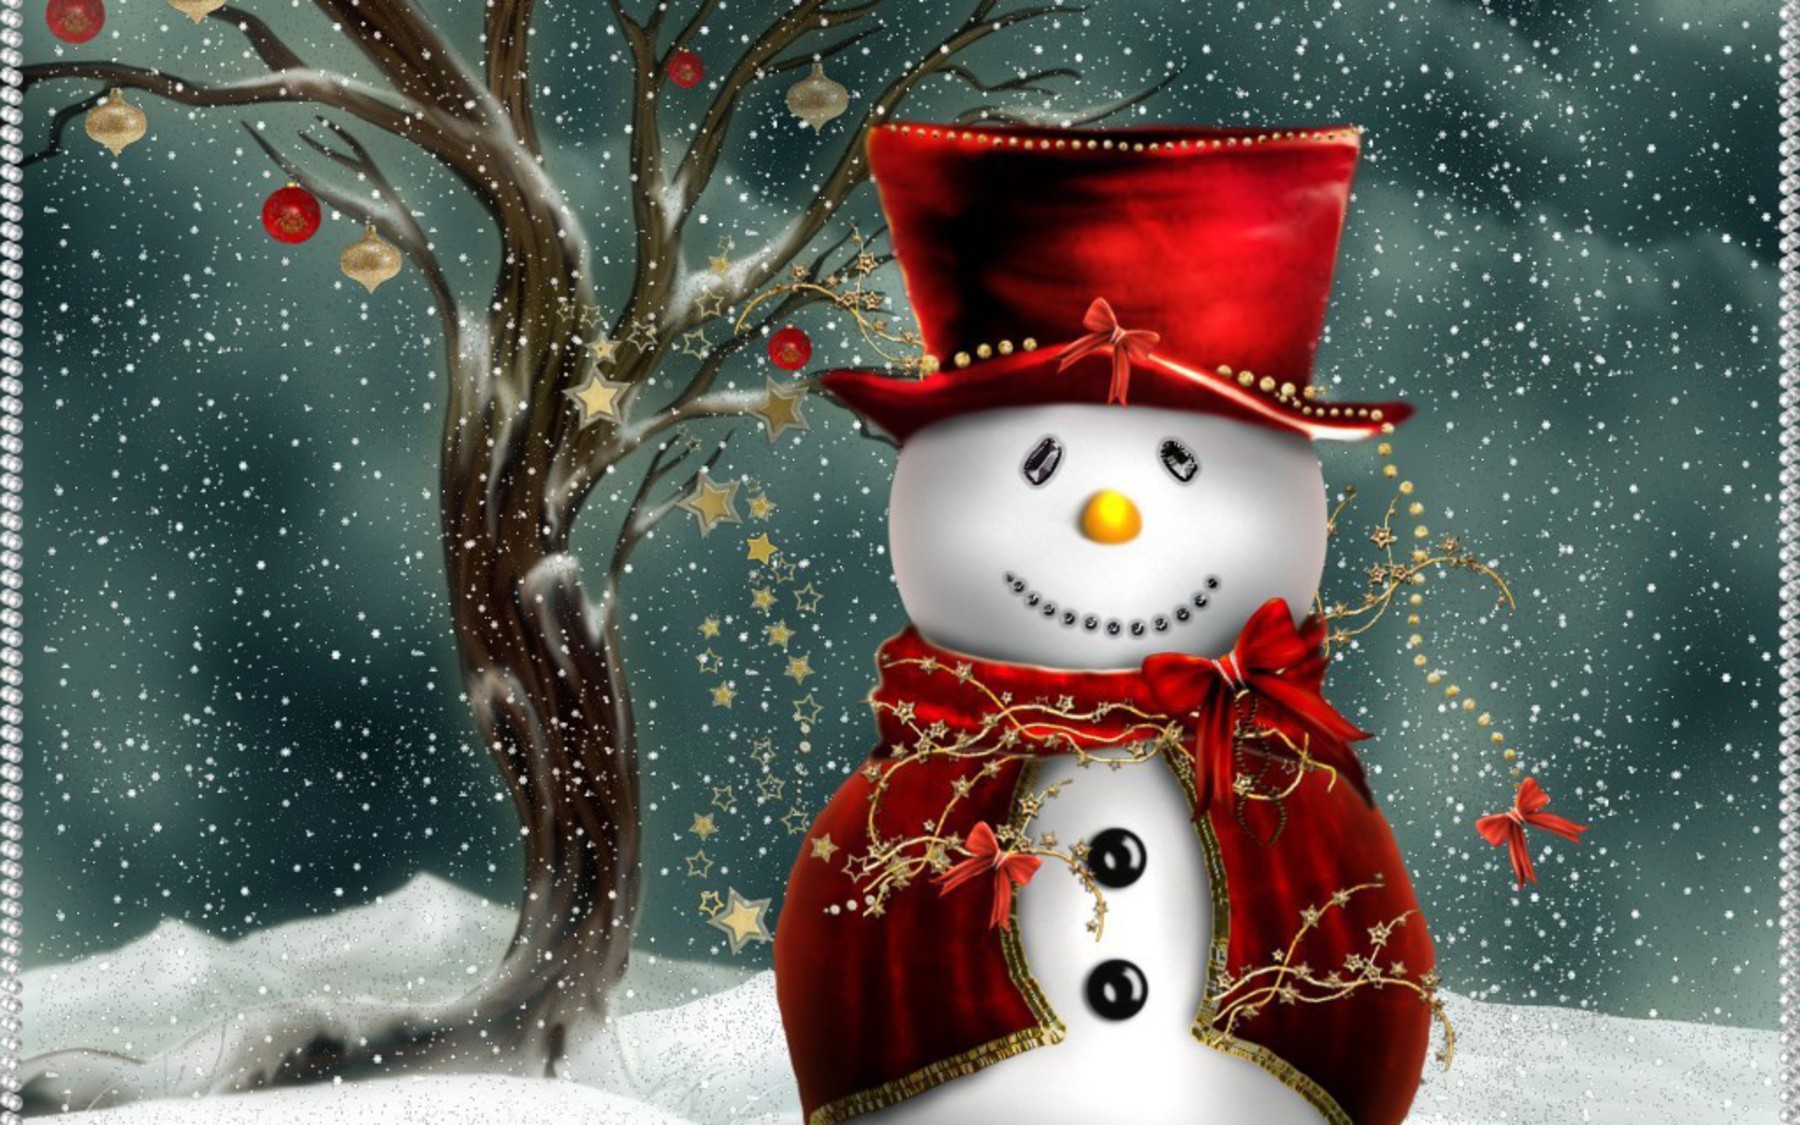 Free Adorable Christmas Snowman wallpaper Wallpapers   HD Wallpapers